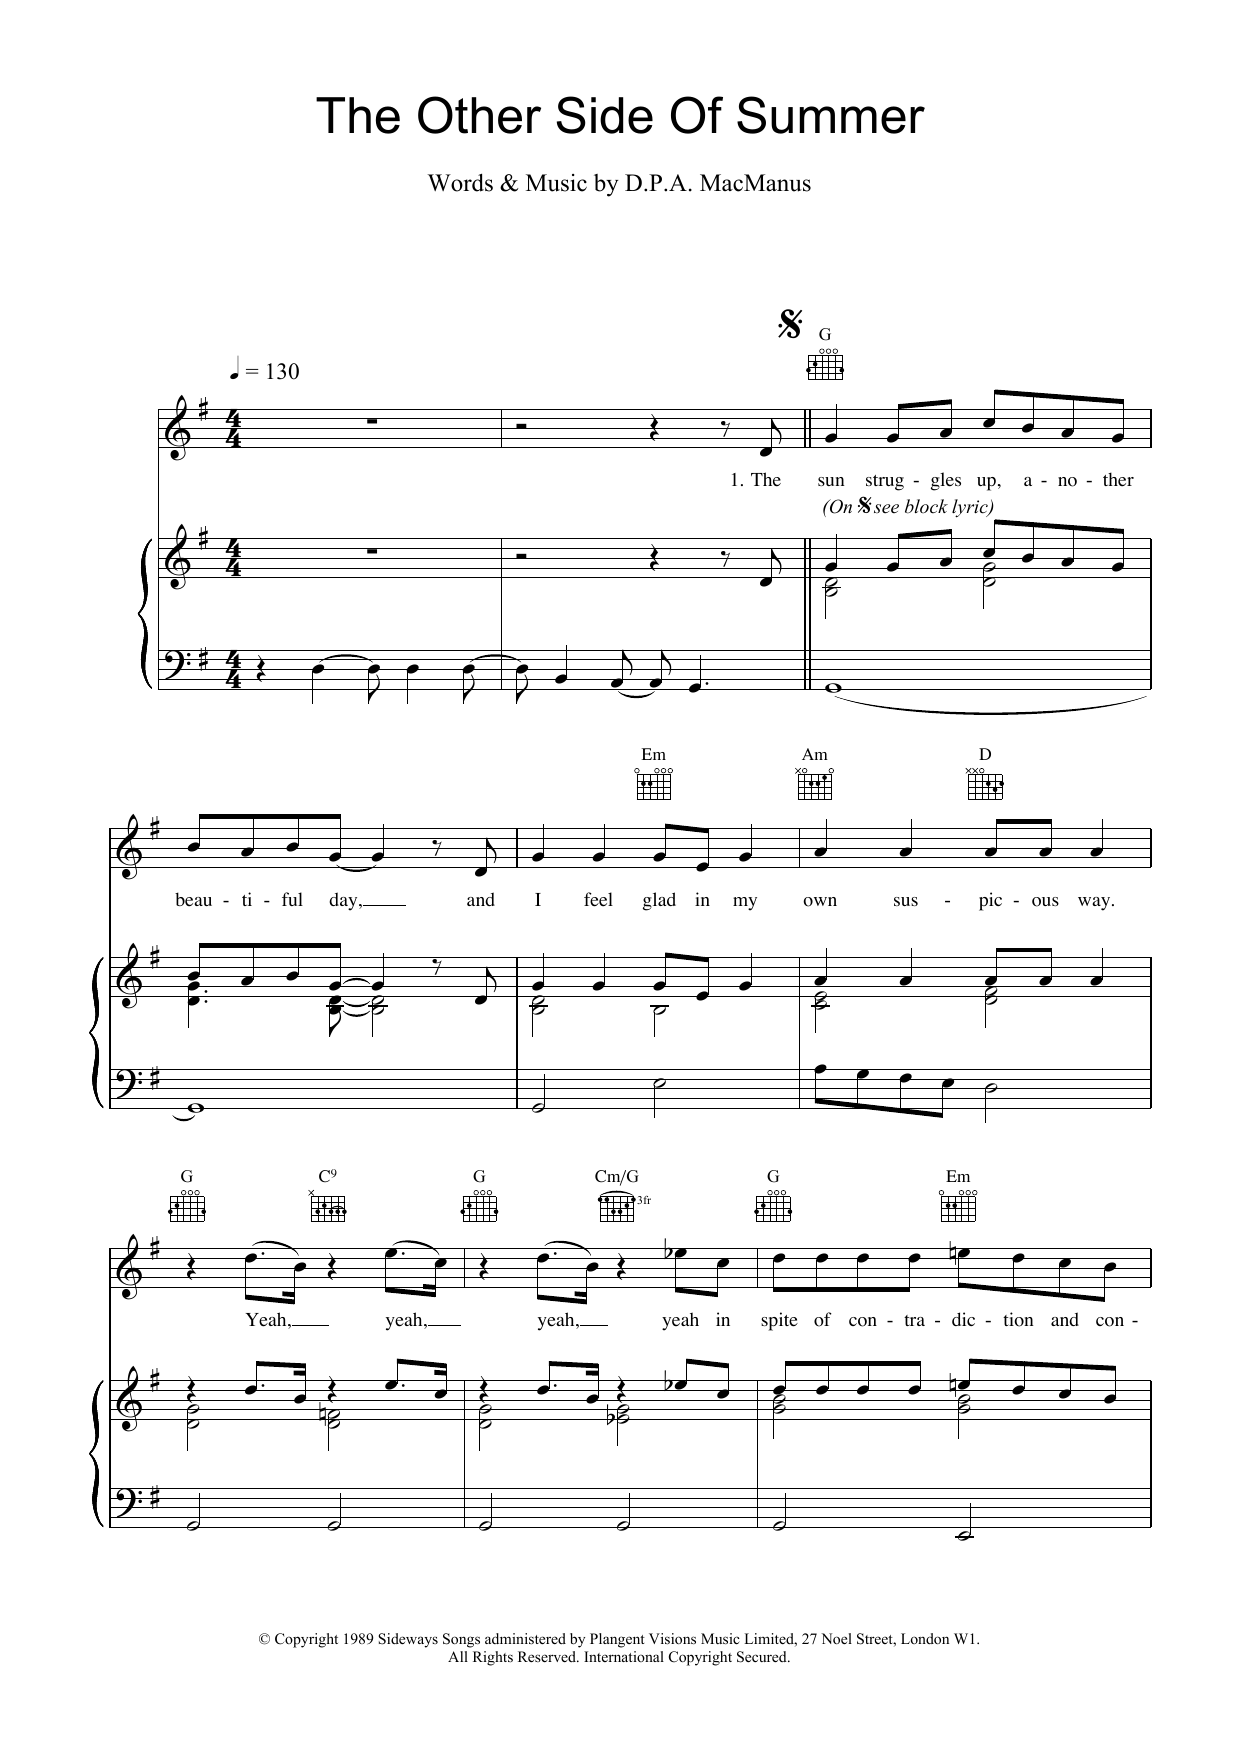 Elvis Costello The Other Side Of Summer sheet music notes and chords. Download Printable PDF.